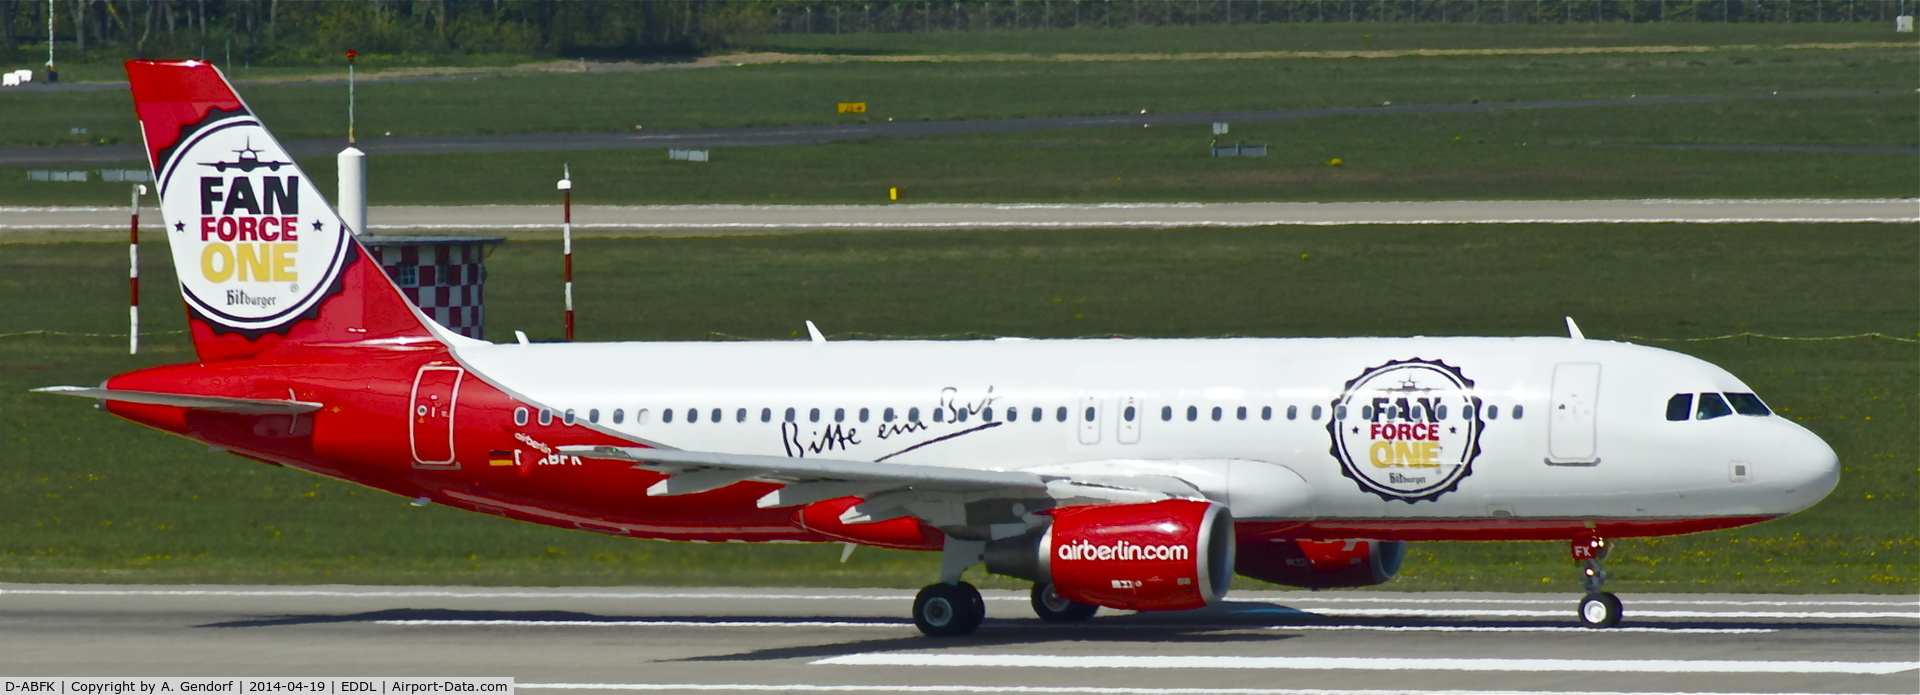 D-ABFK, 2010 Airbus A320-214 C/N 4433, Air Berlin (Fan Force One cs.), this Jet was setted up especially for the soccer world championship in Brasil this year by Air Berlin and the Bitburger Brewery, to fly fans to Brasil, see it here departing at Düsseldorf Int'l(EDDL)